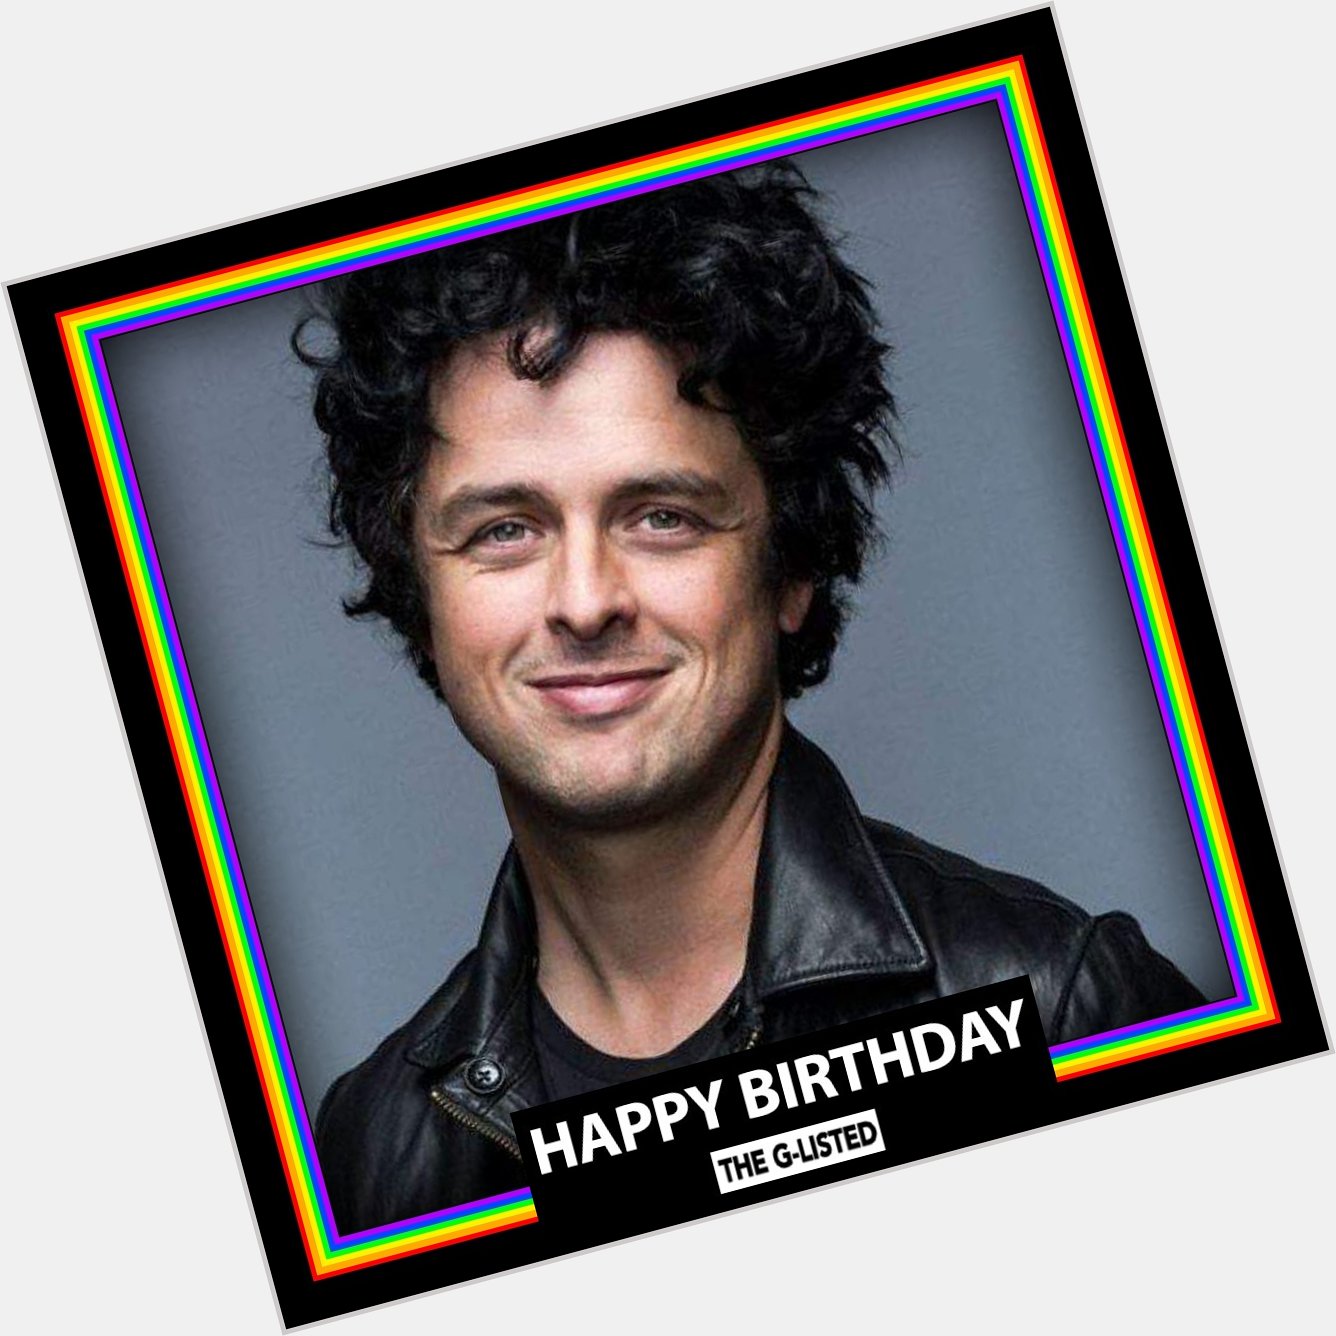 Happy birthday to living rock music legend Billie Joe Armstrong (of Green Day)!!! 